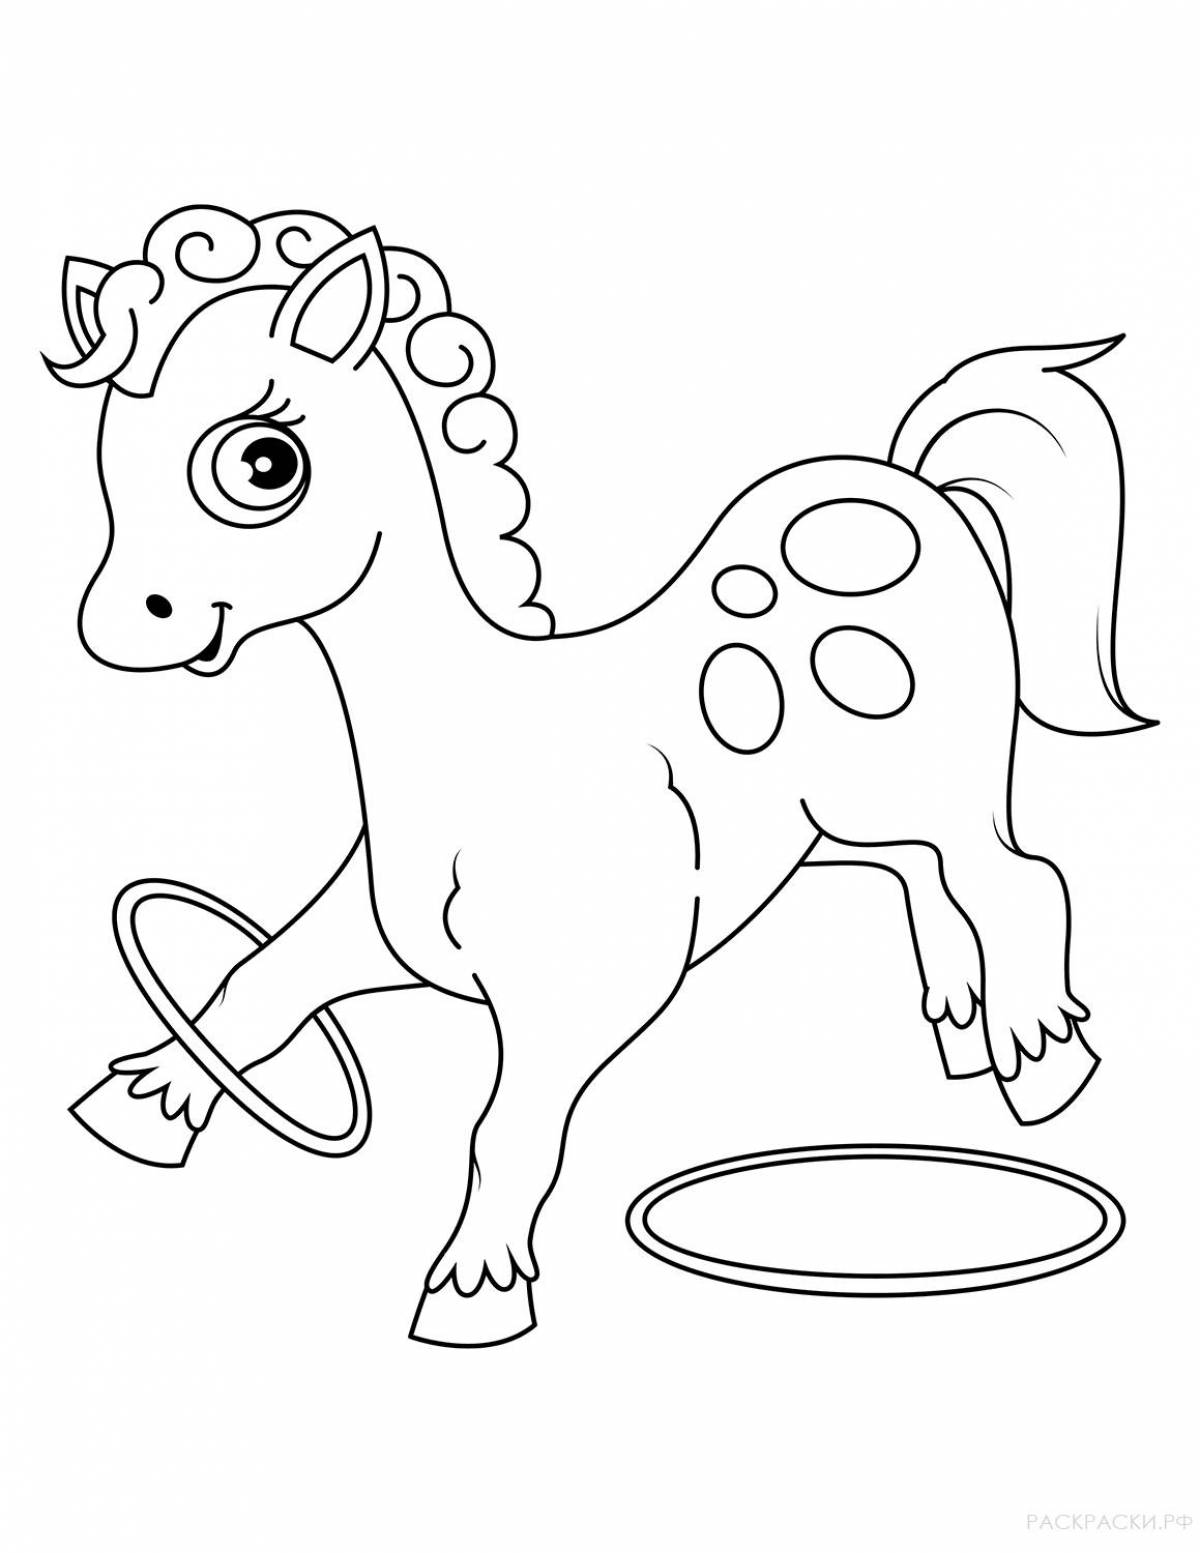 Energetic Appaloosa horse coloring book for kids